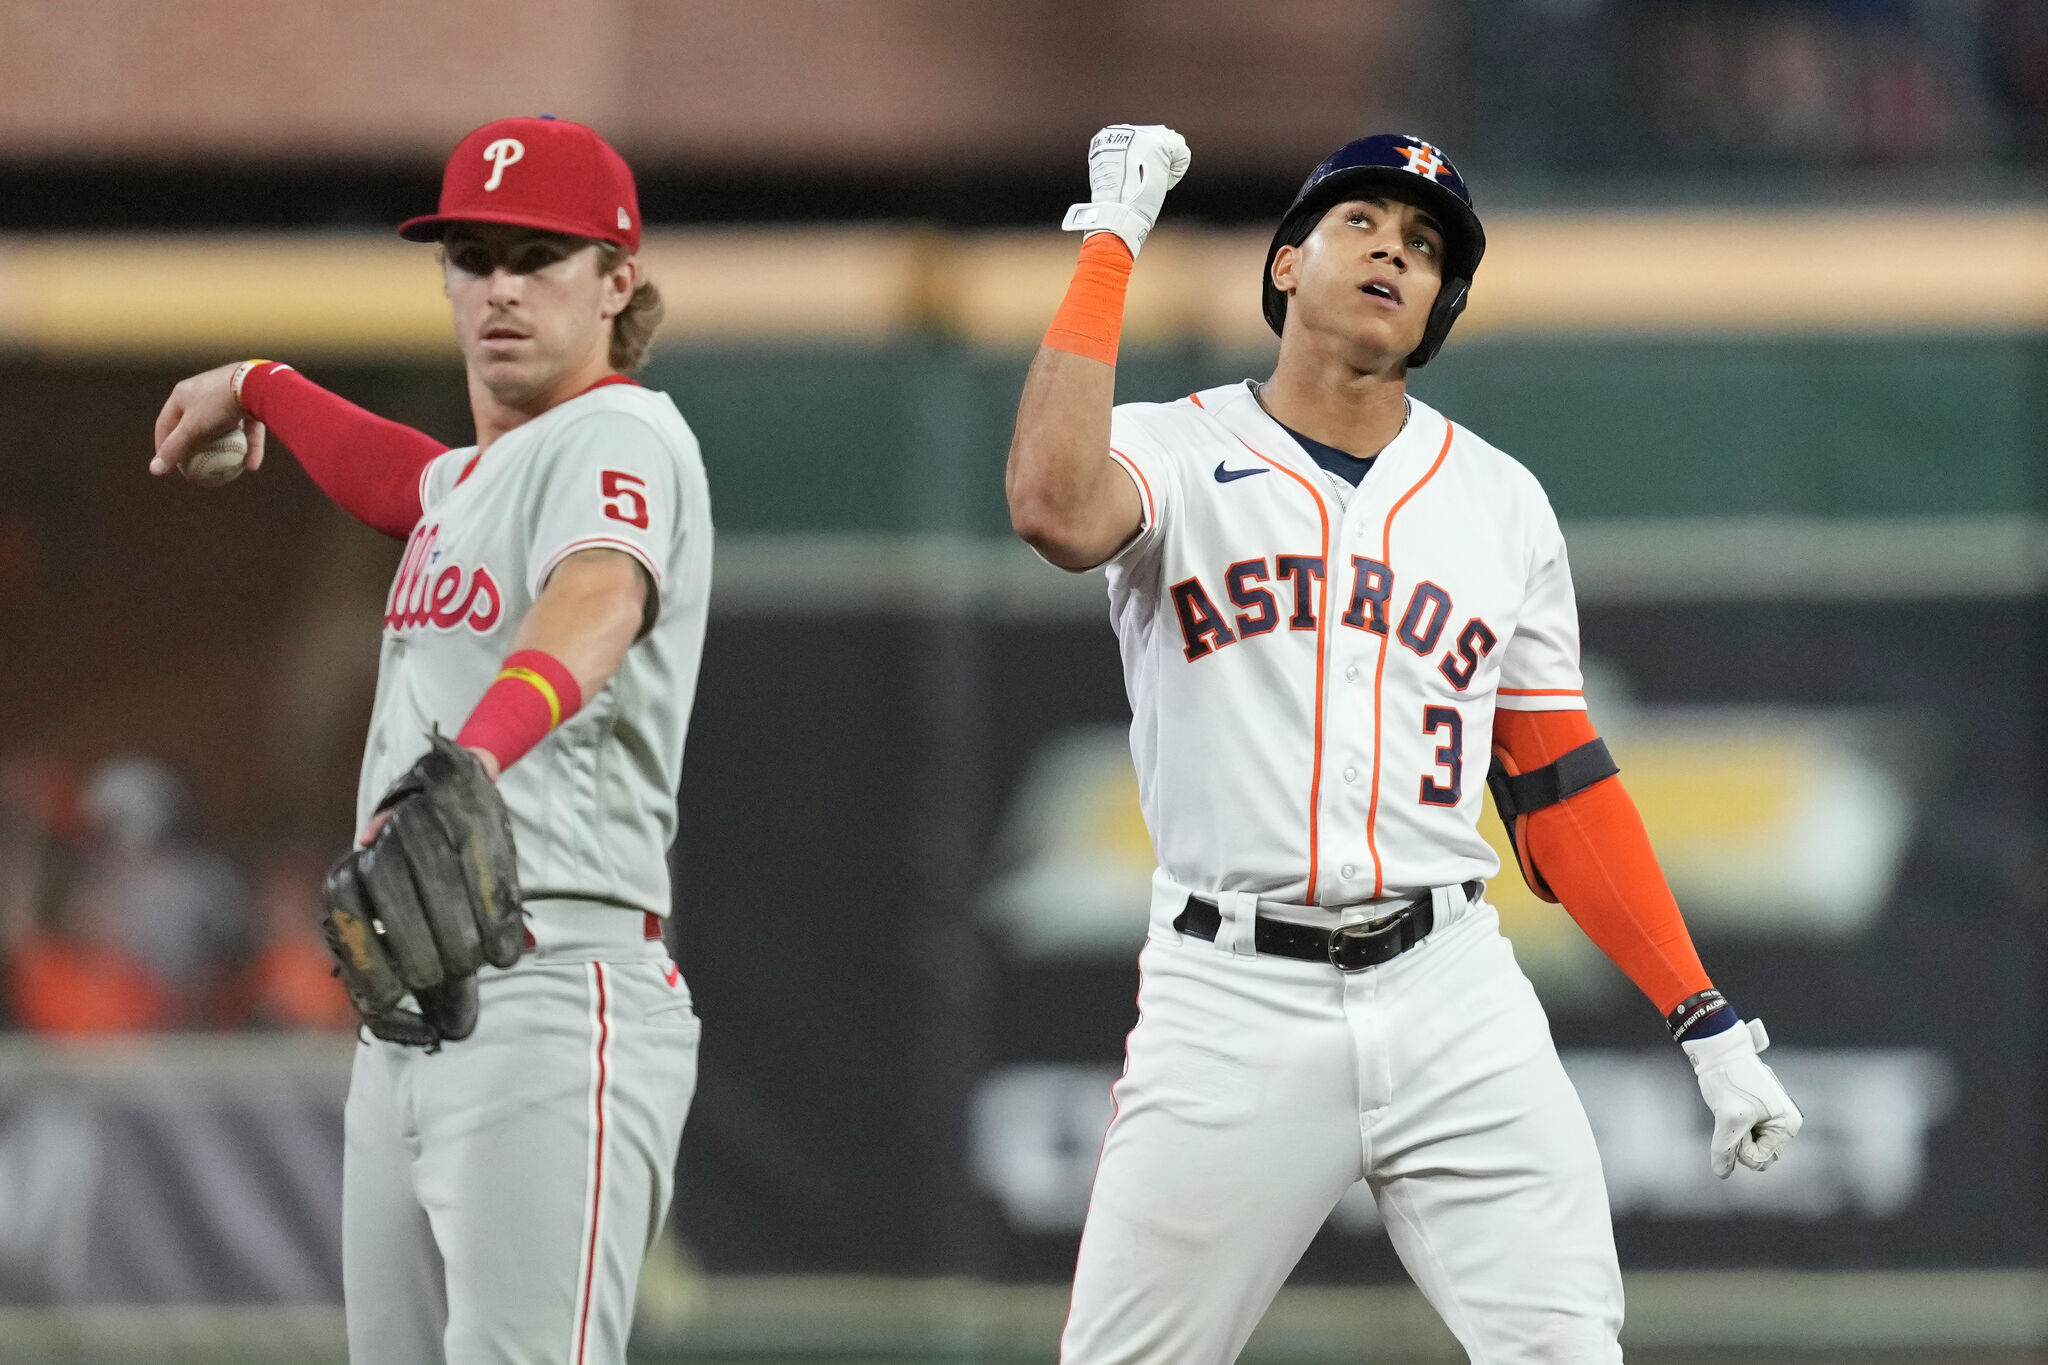 Phillies-Astros World Series shows MLB is failing Black Americans